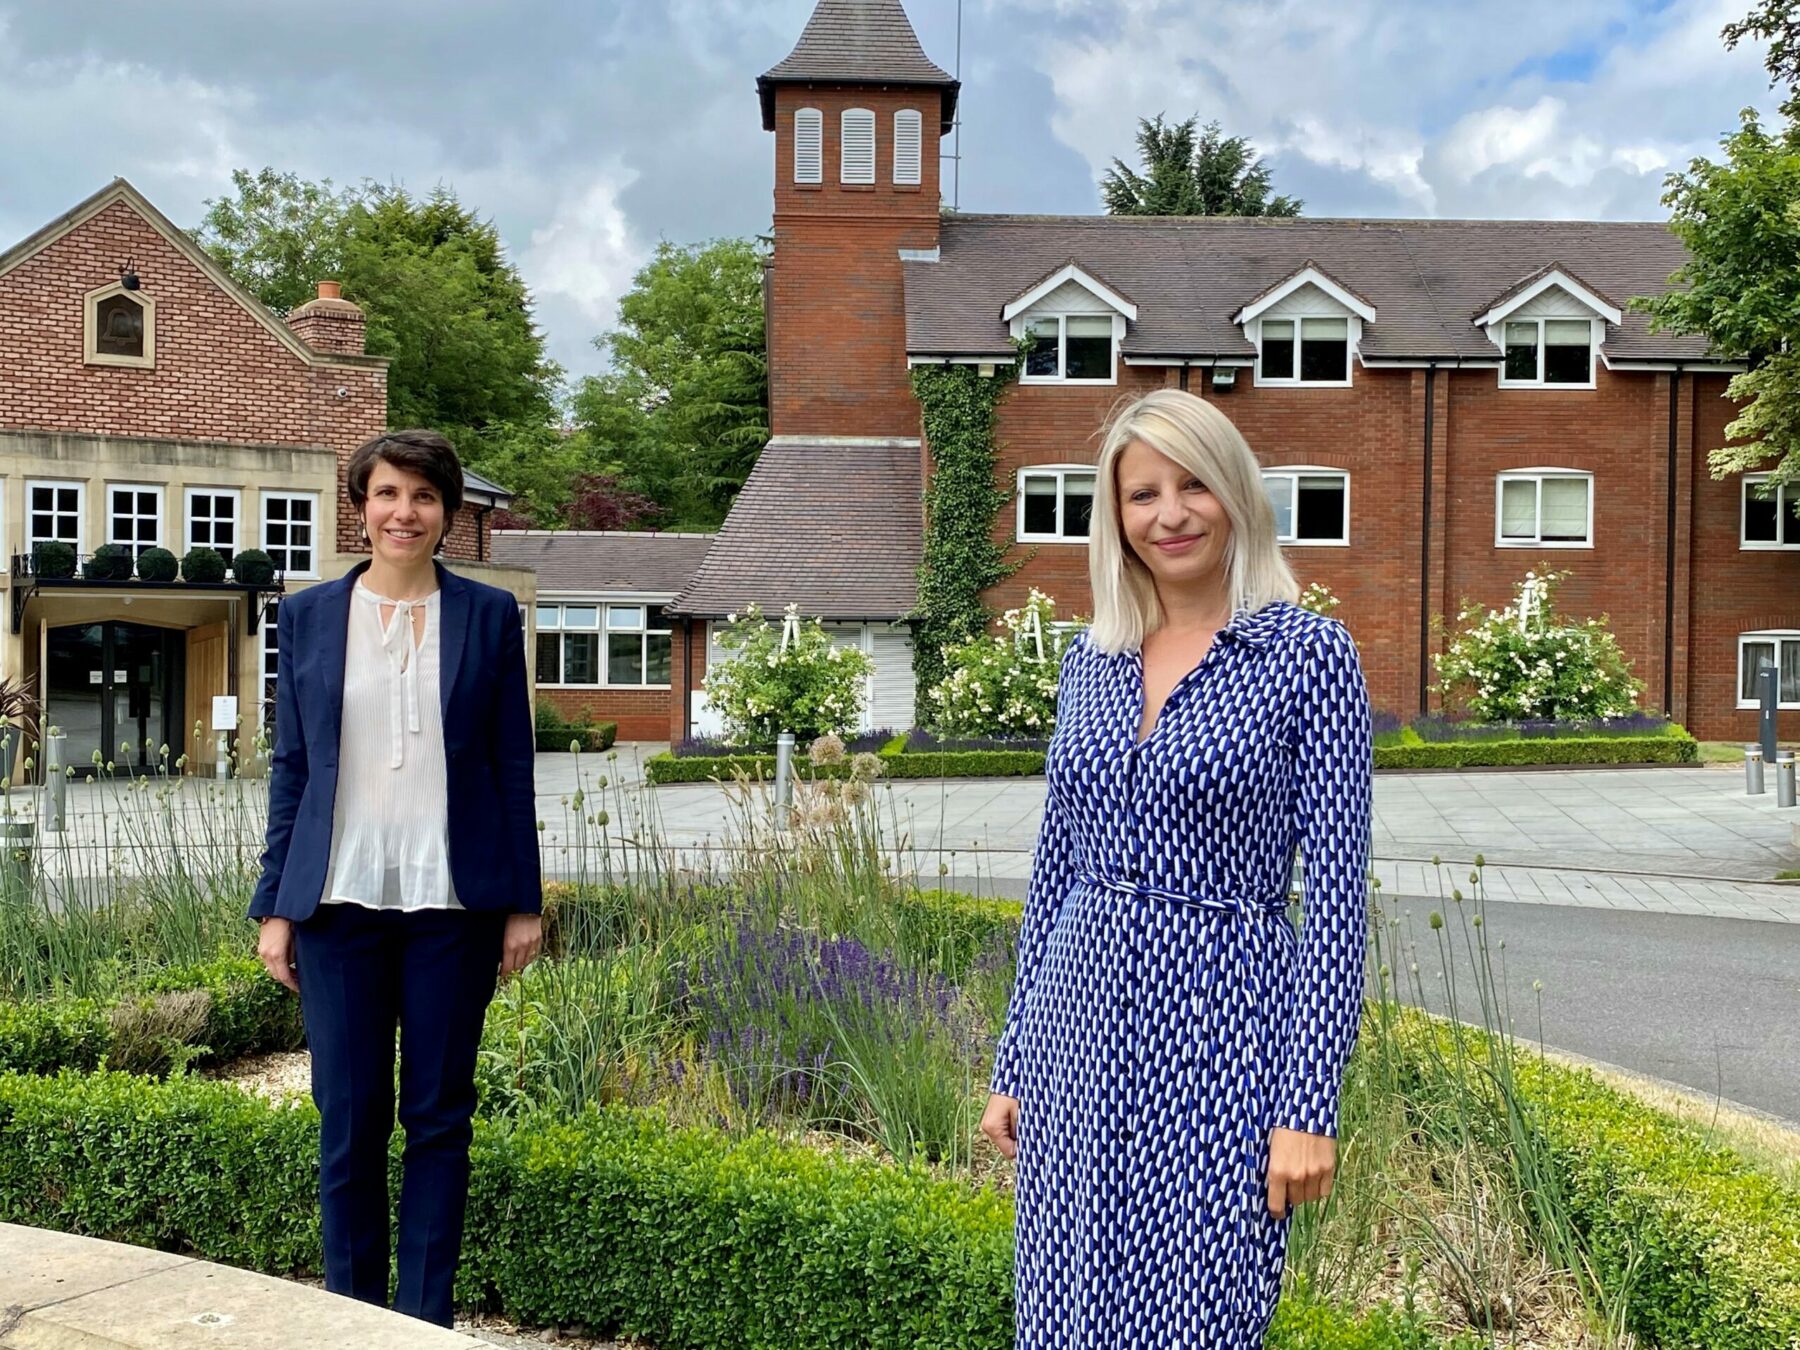 Sara Dufton, Director of Revenue, and Kirsten Price, Head of People and Culture at The Belfry